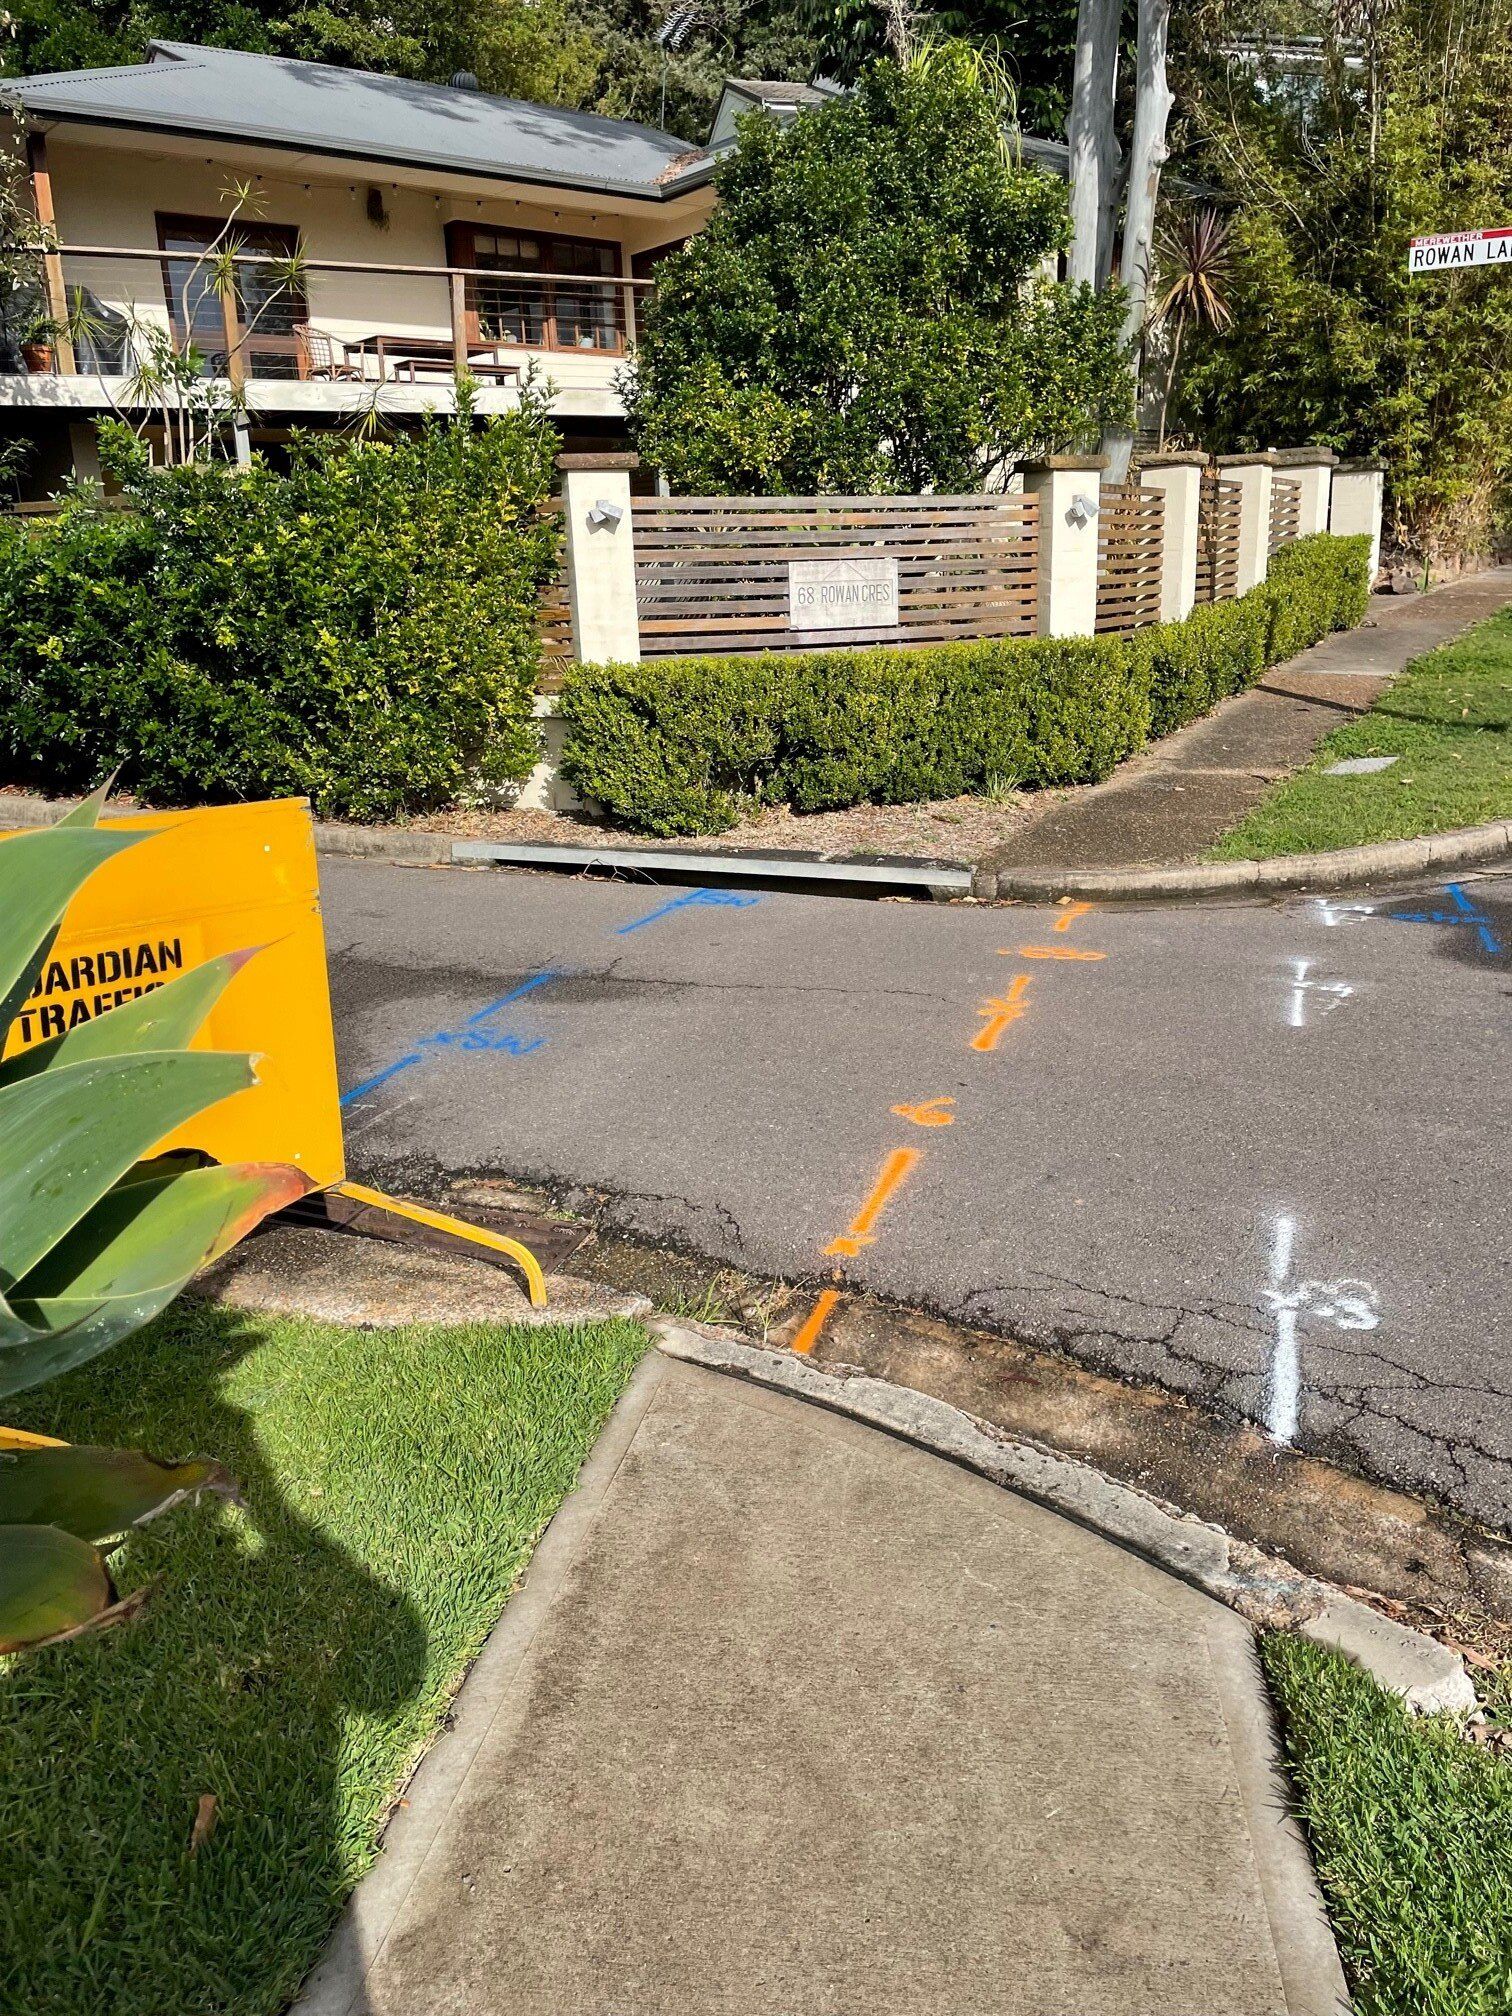 Underground Utility Markings on Street — East Coast Locating Services in Wallalong, NSW